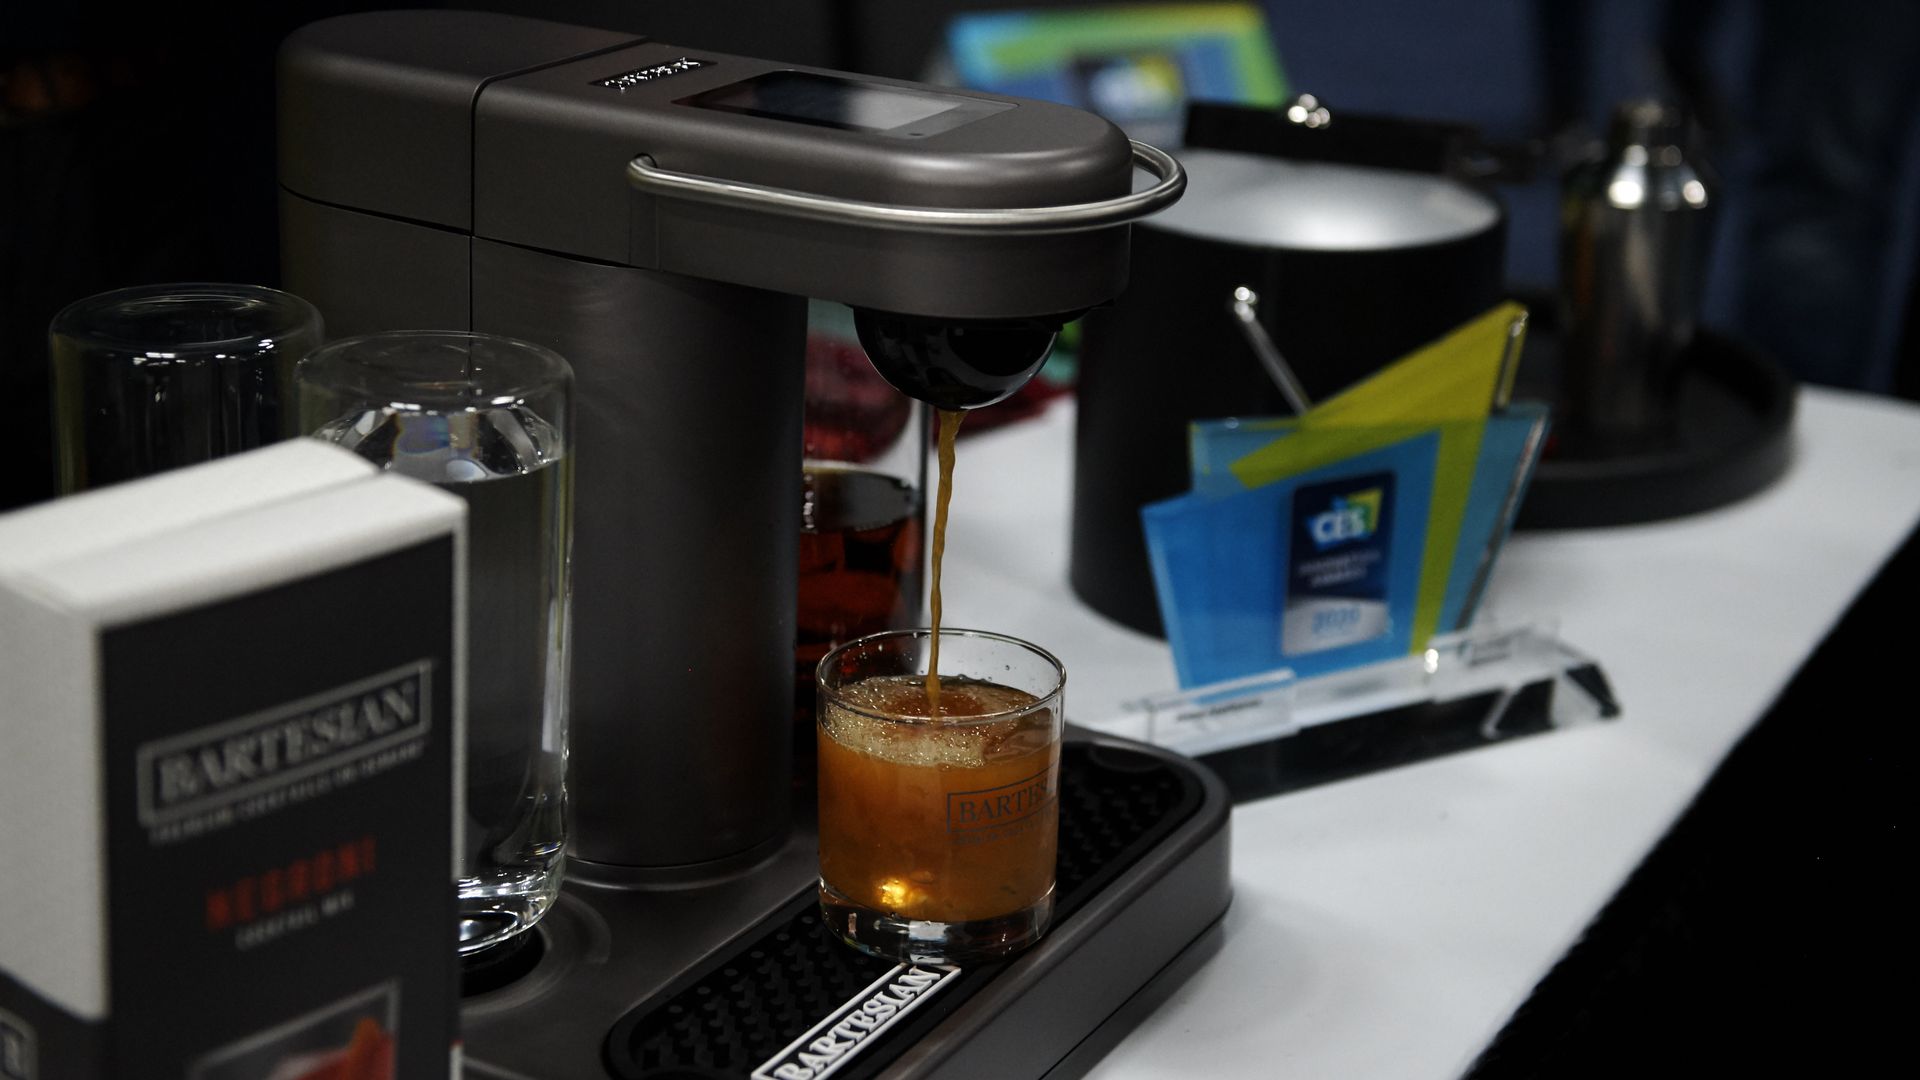 A Bartesian cocktail maker, which is a small kitchen appliance in black that uses pods to make cocktails, sits on a countertop.